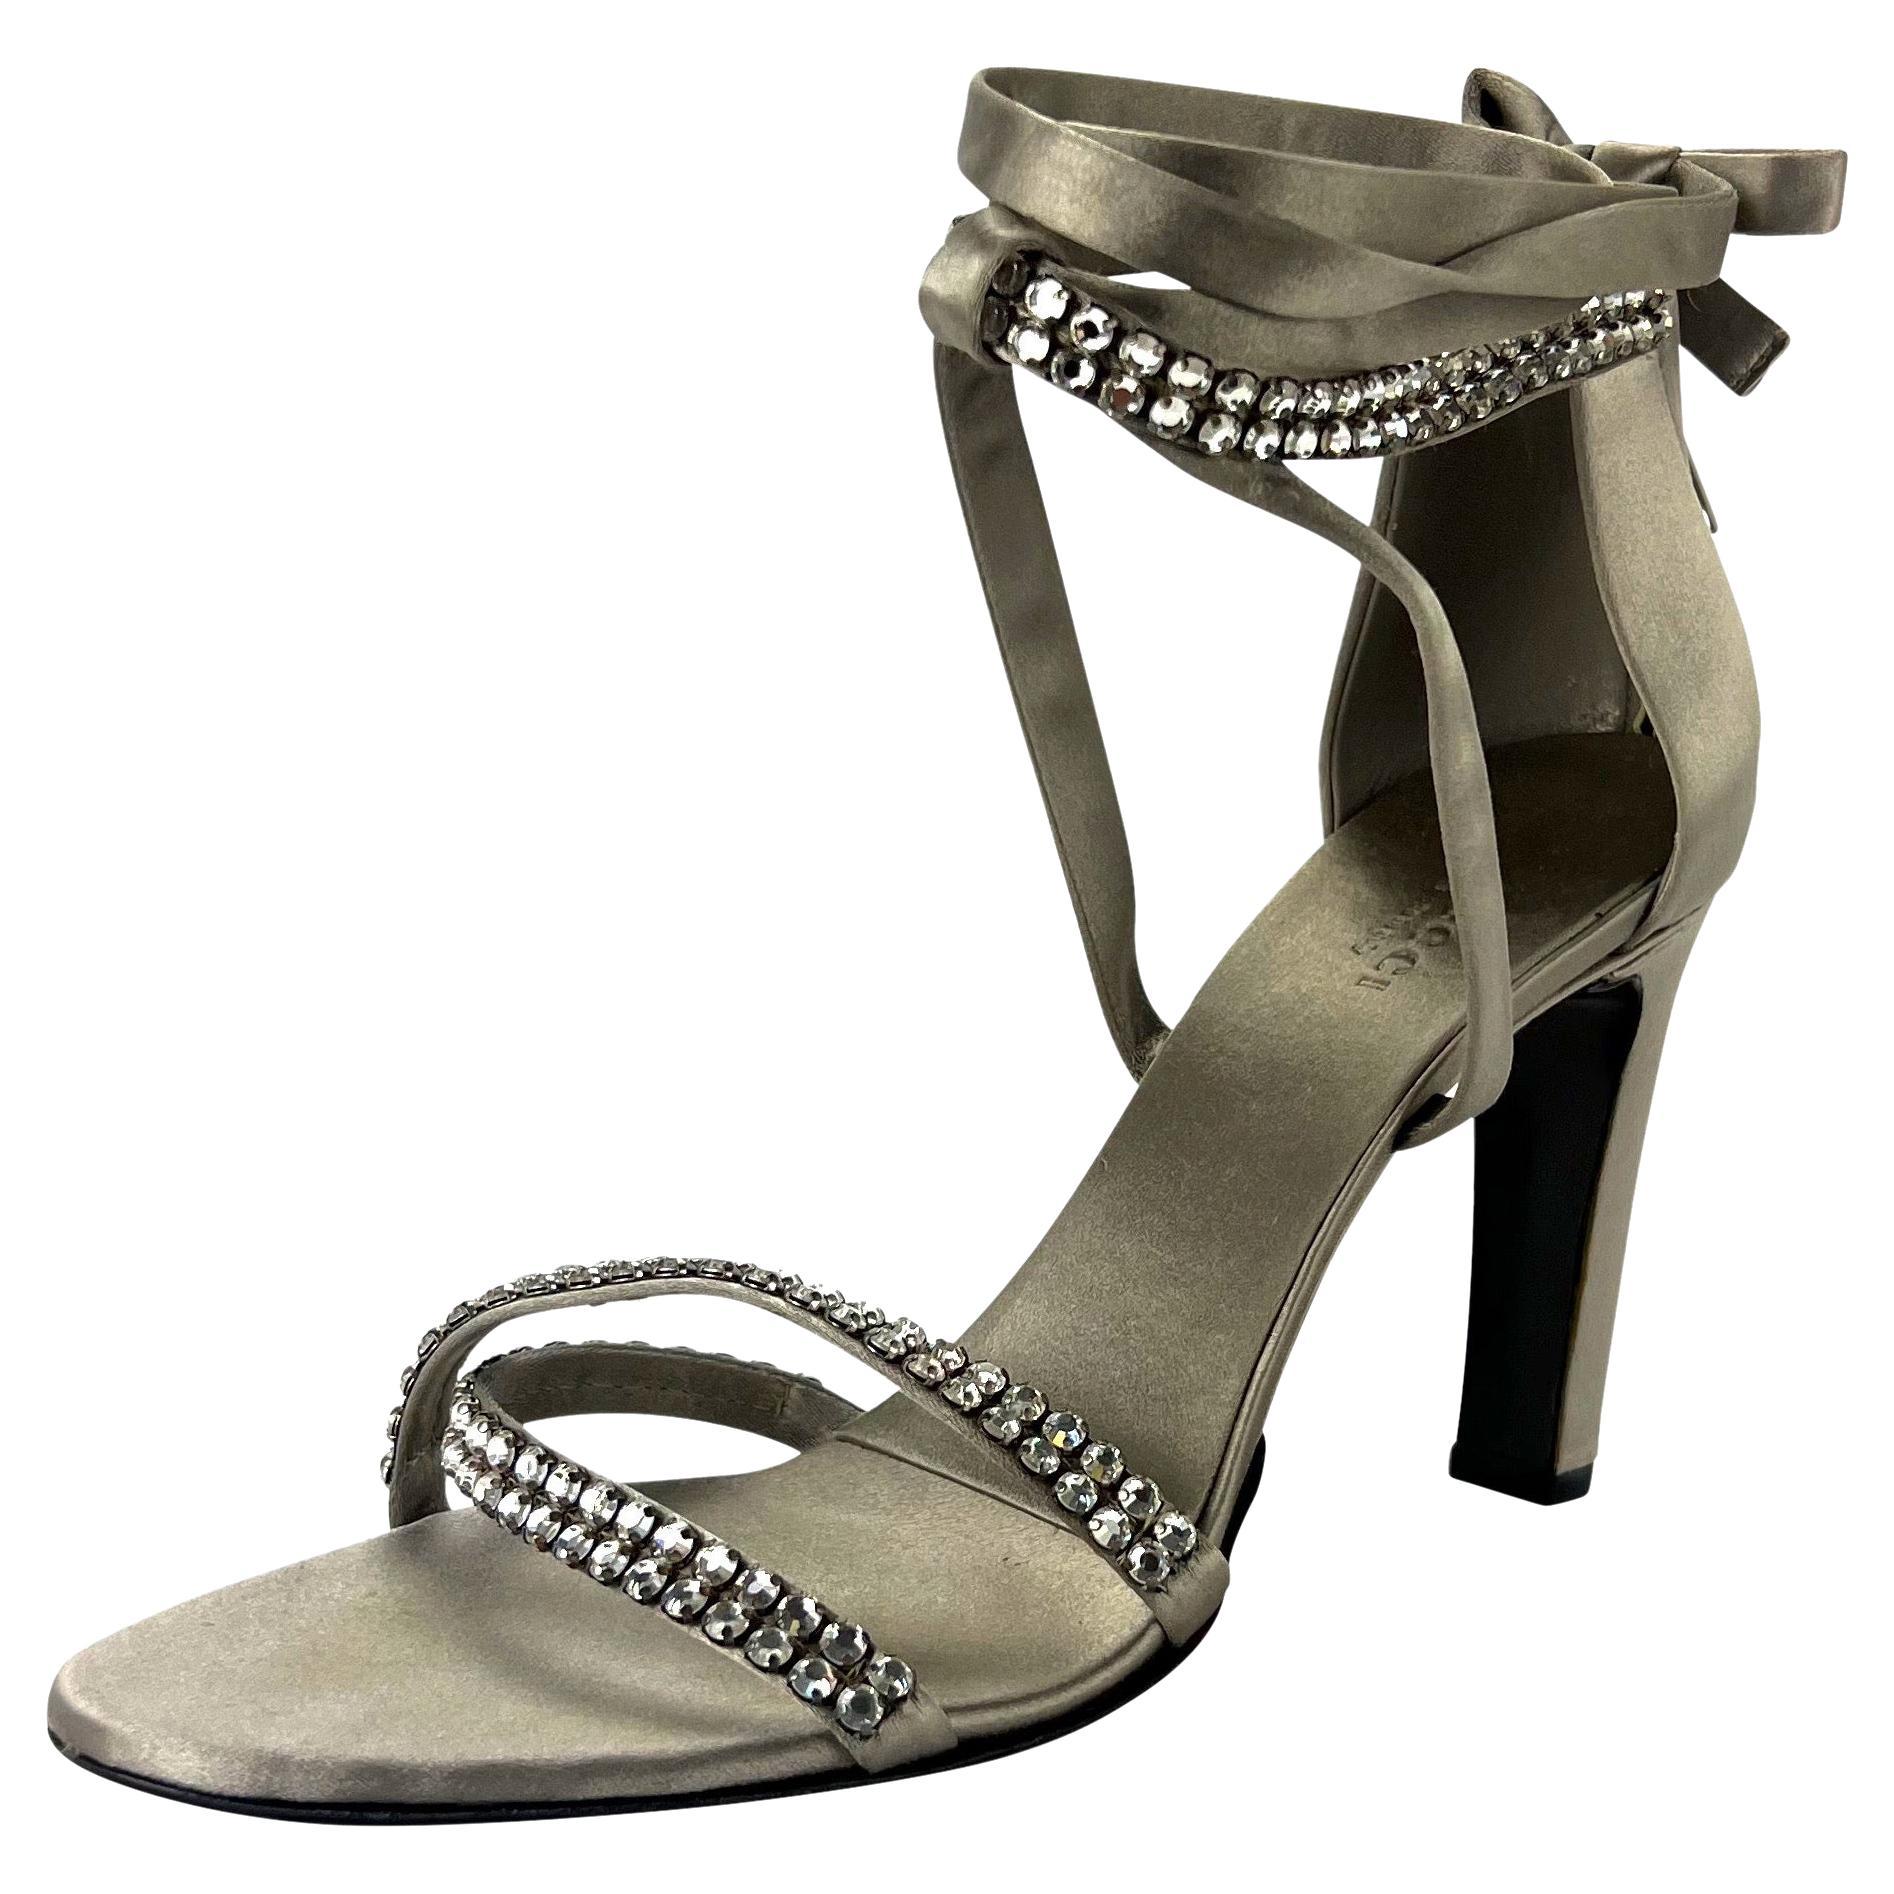 Presenting a fabulous pair of silver silk satin Gucci sandal heels, designed by Tom Ford. From the Fall/Winter 2004 collection, these slingback heels are made complete with rhinestone accented toe straps and ankle lace ties. 

Additional